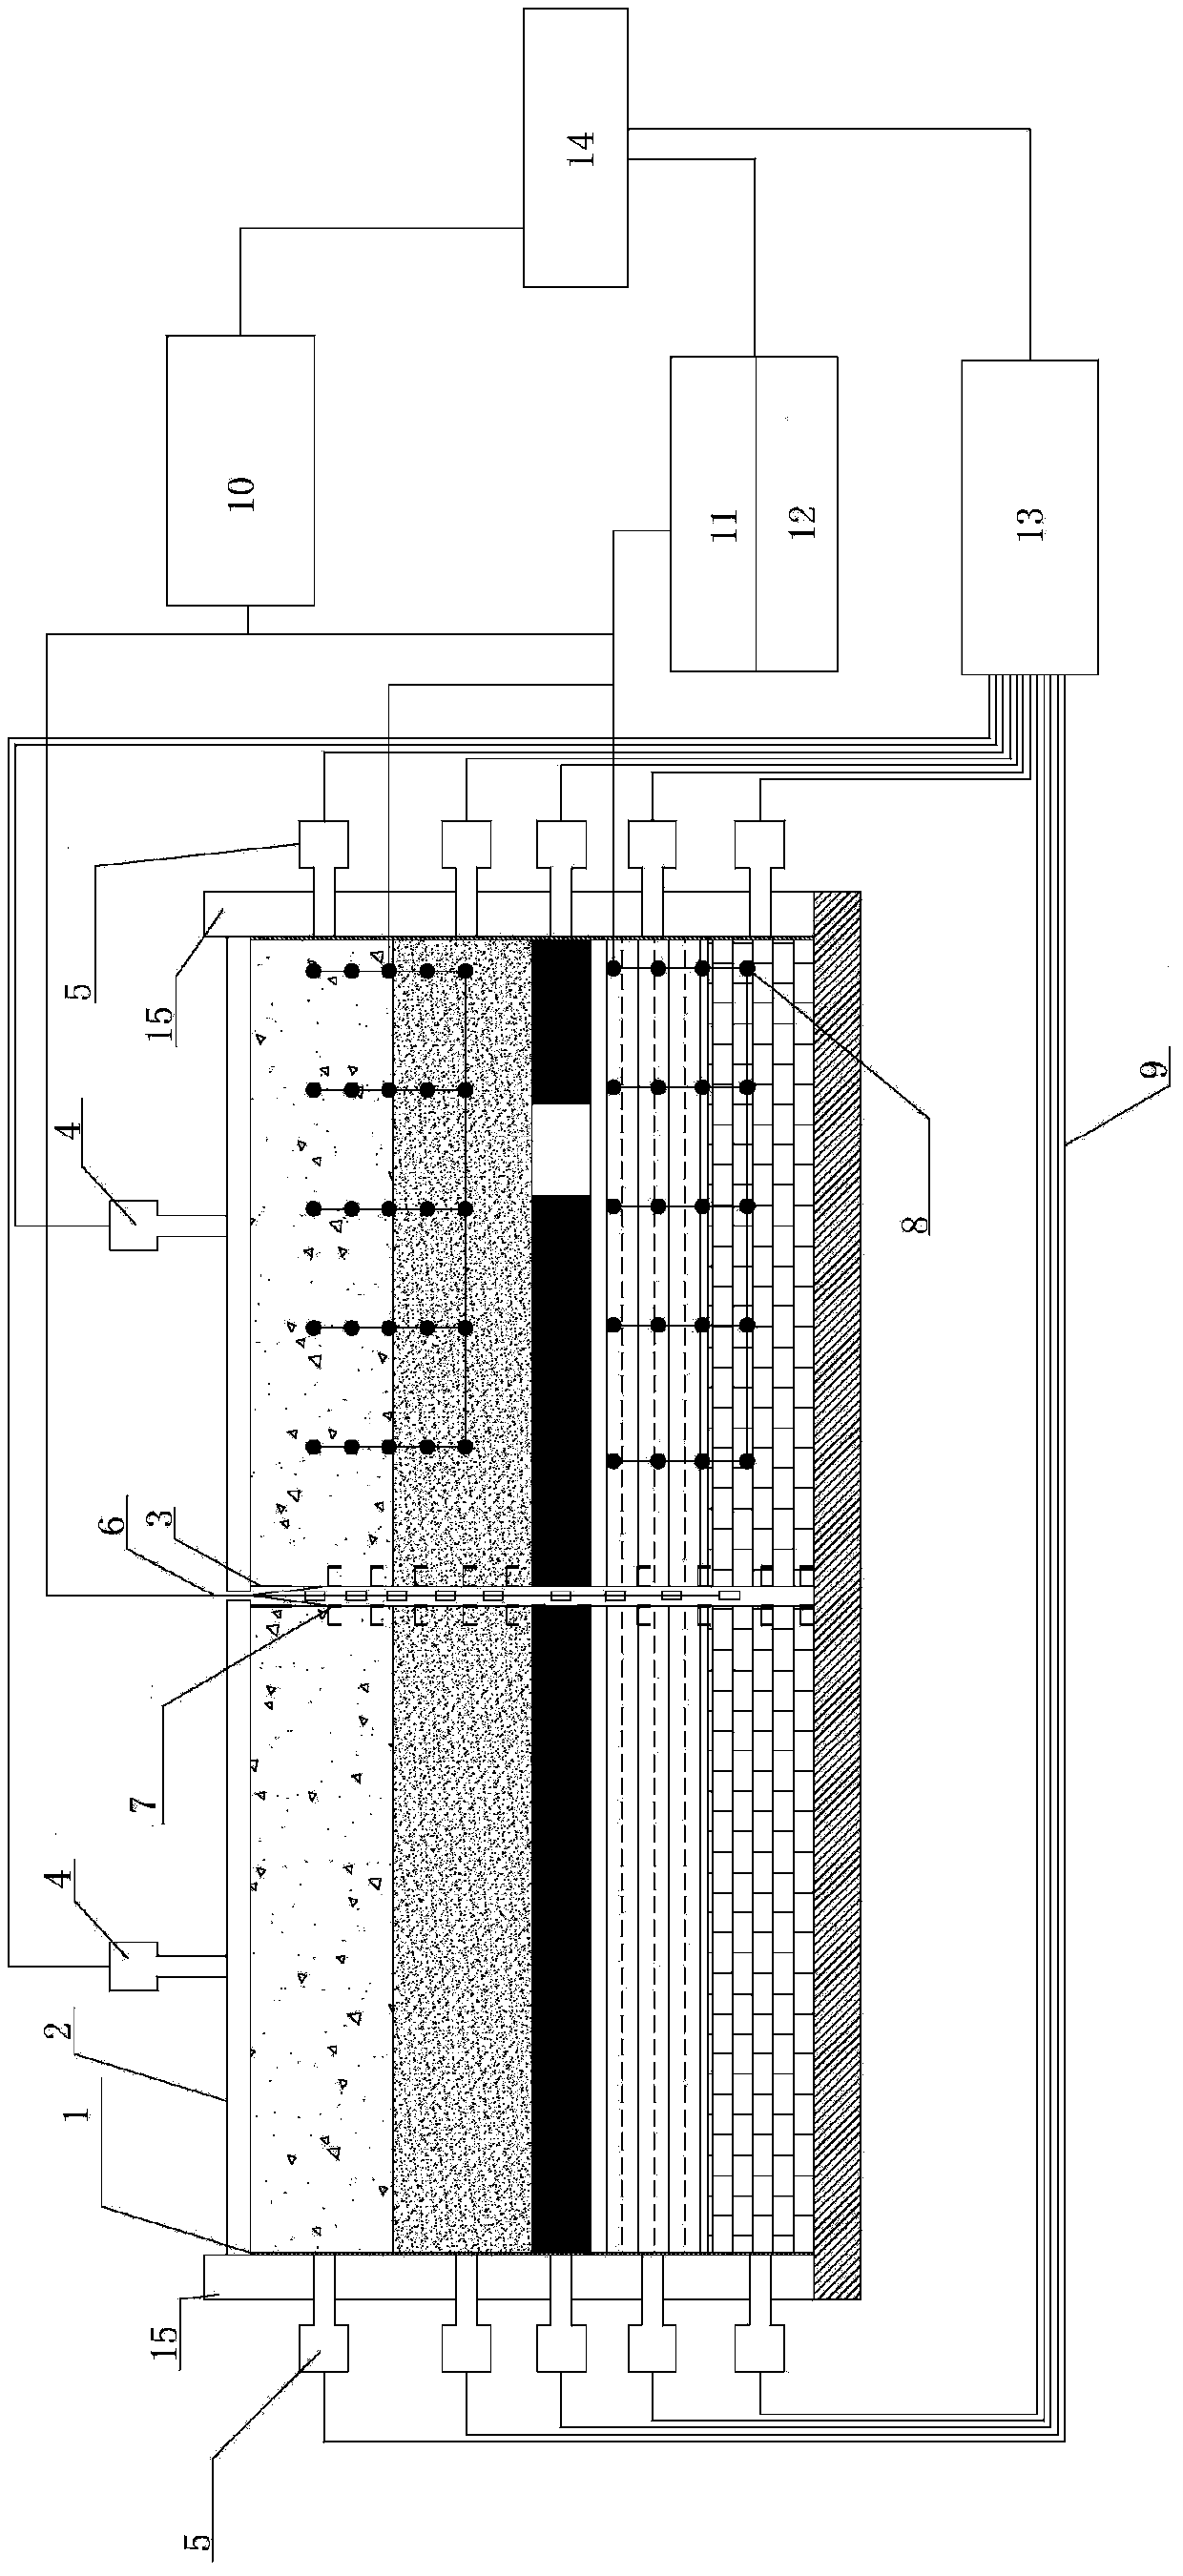 Mining fracturing simulating test device for sealing drilling